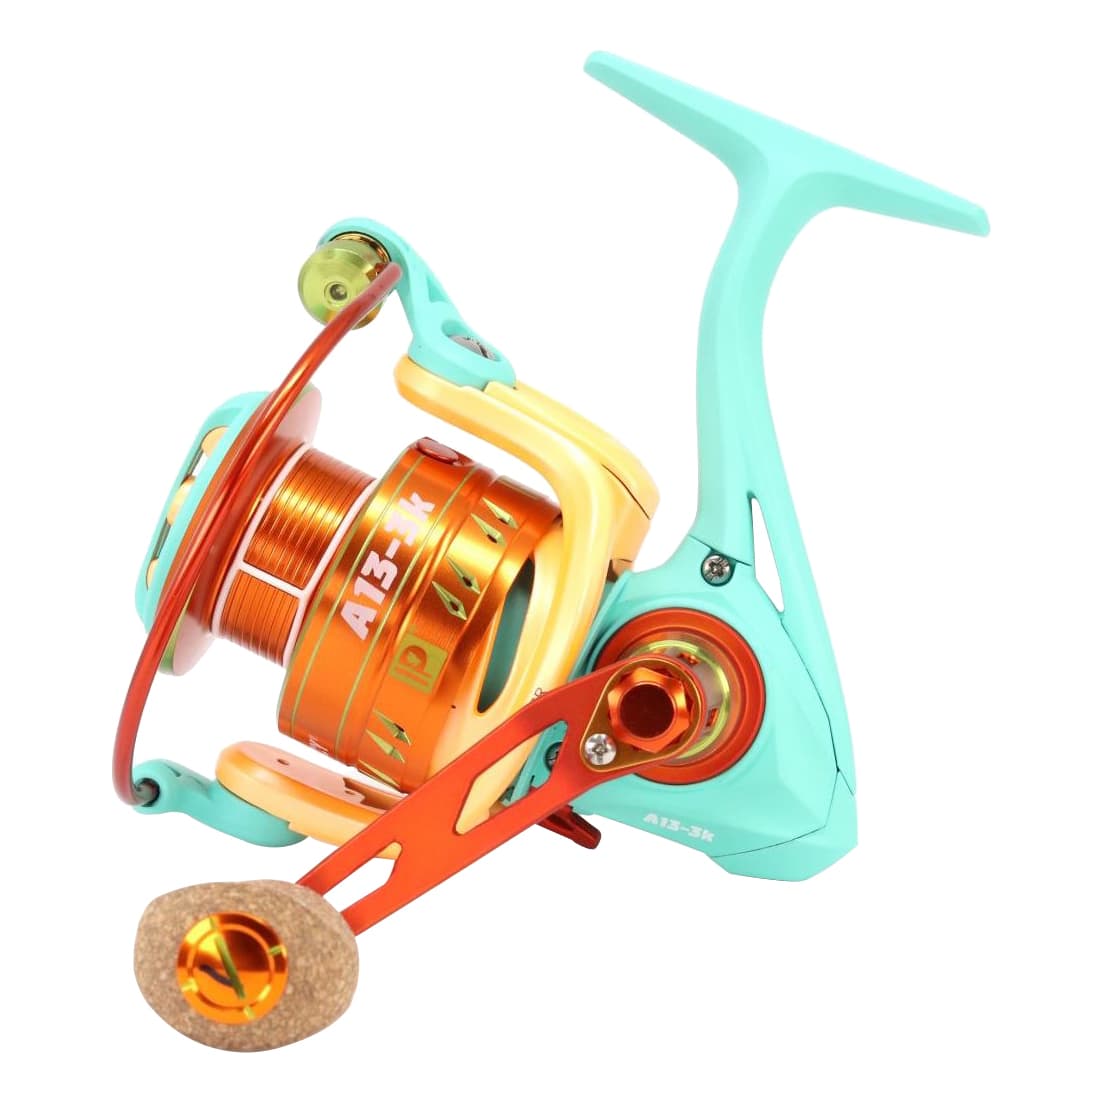 MGE Reels and Accessories - A Quality Reel That Divers Can Trust!